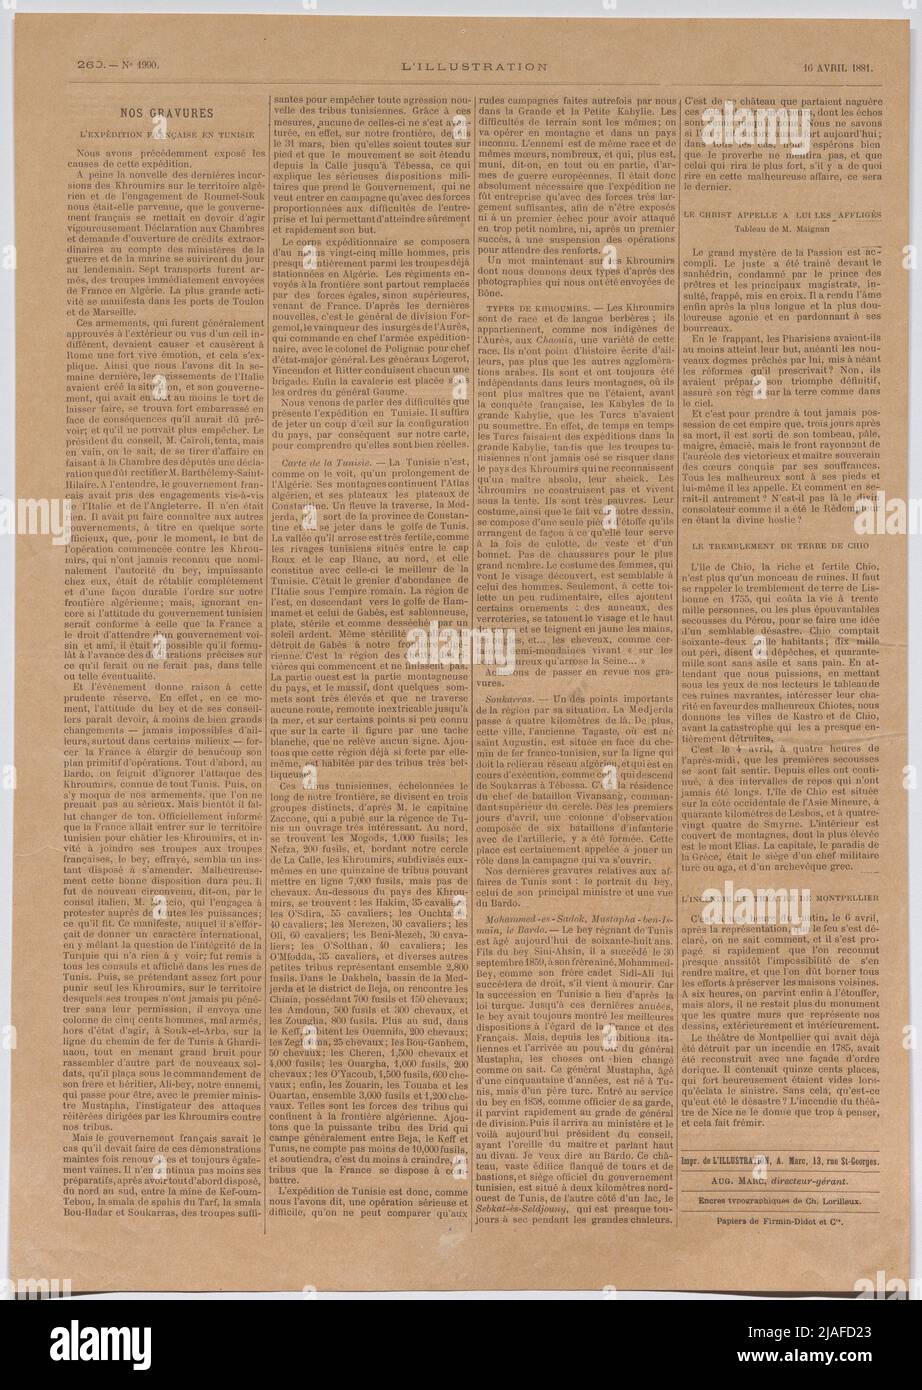 L´expedition francaise en tunisie '. Newspaper articles about the French occupation of Tunisia, 1881. Unknown Stock Photo